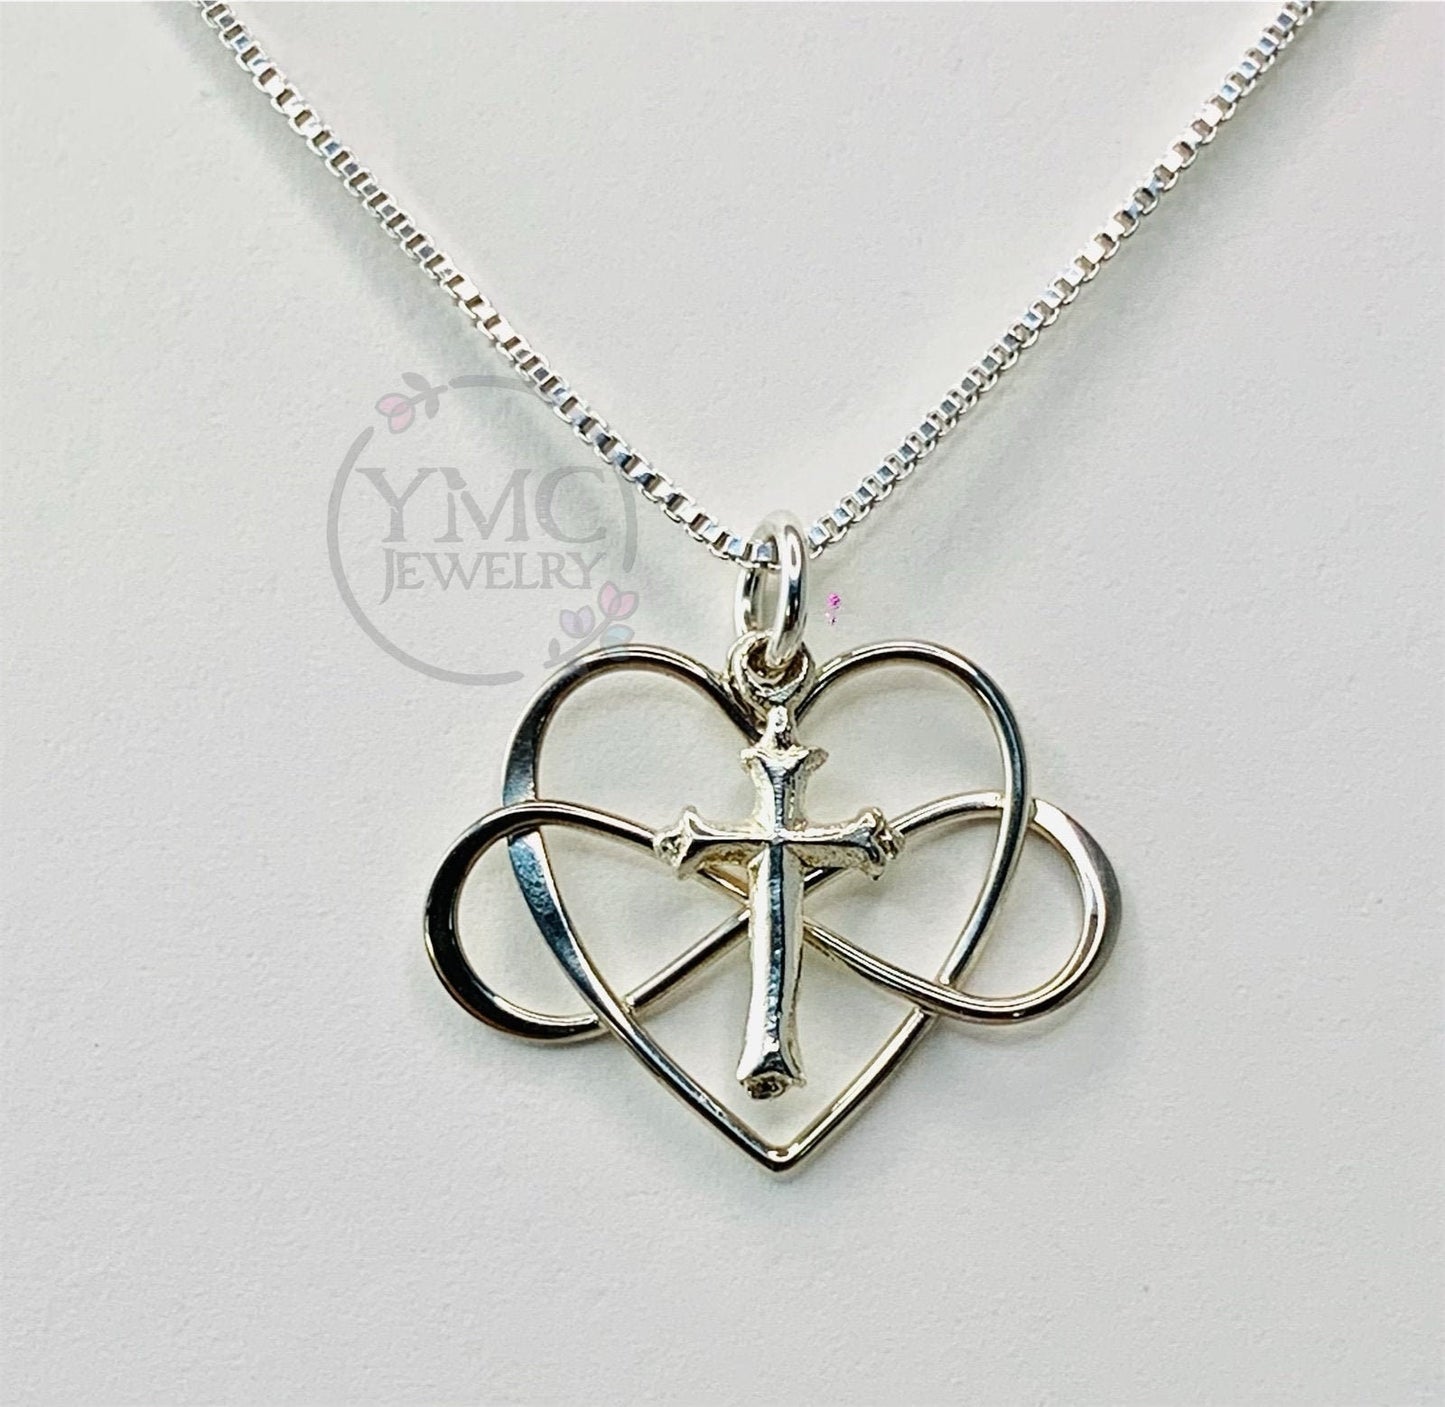 Sterling Silver Infinity Cross Necklace For Girls,Infinity Necklace,Religious Necklace,Cross Necklace,Bridesmaid Necklace,Mother Necklace